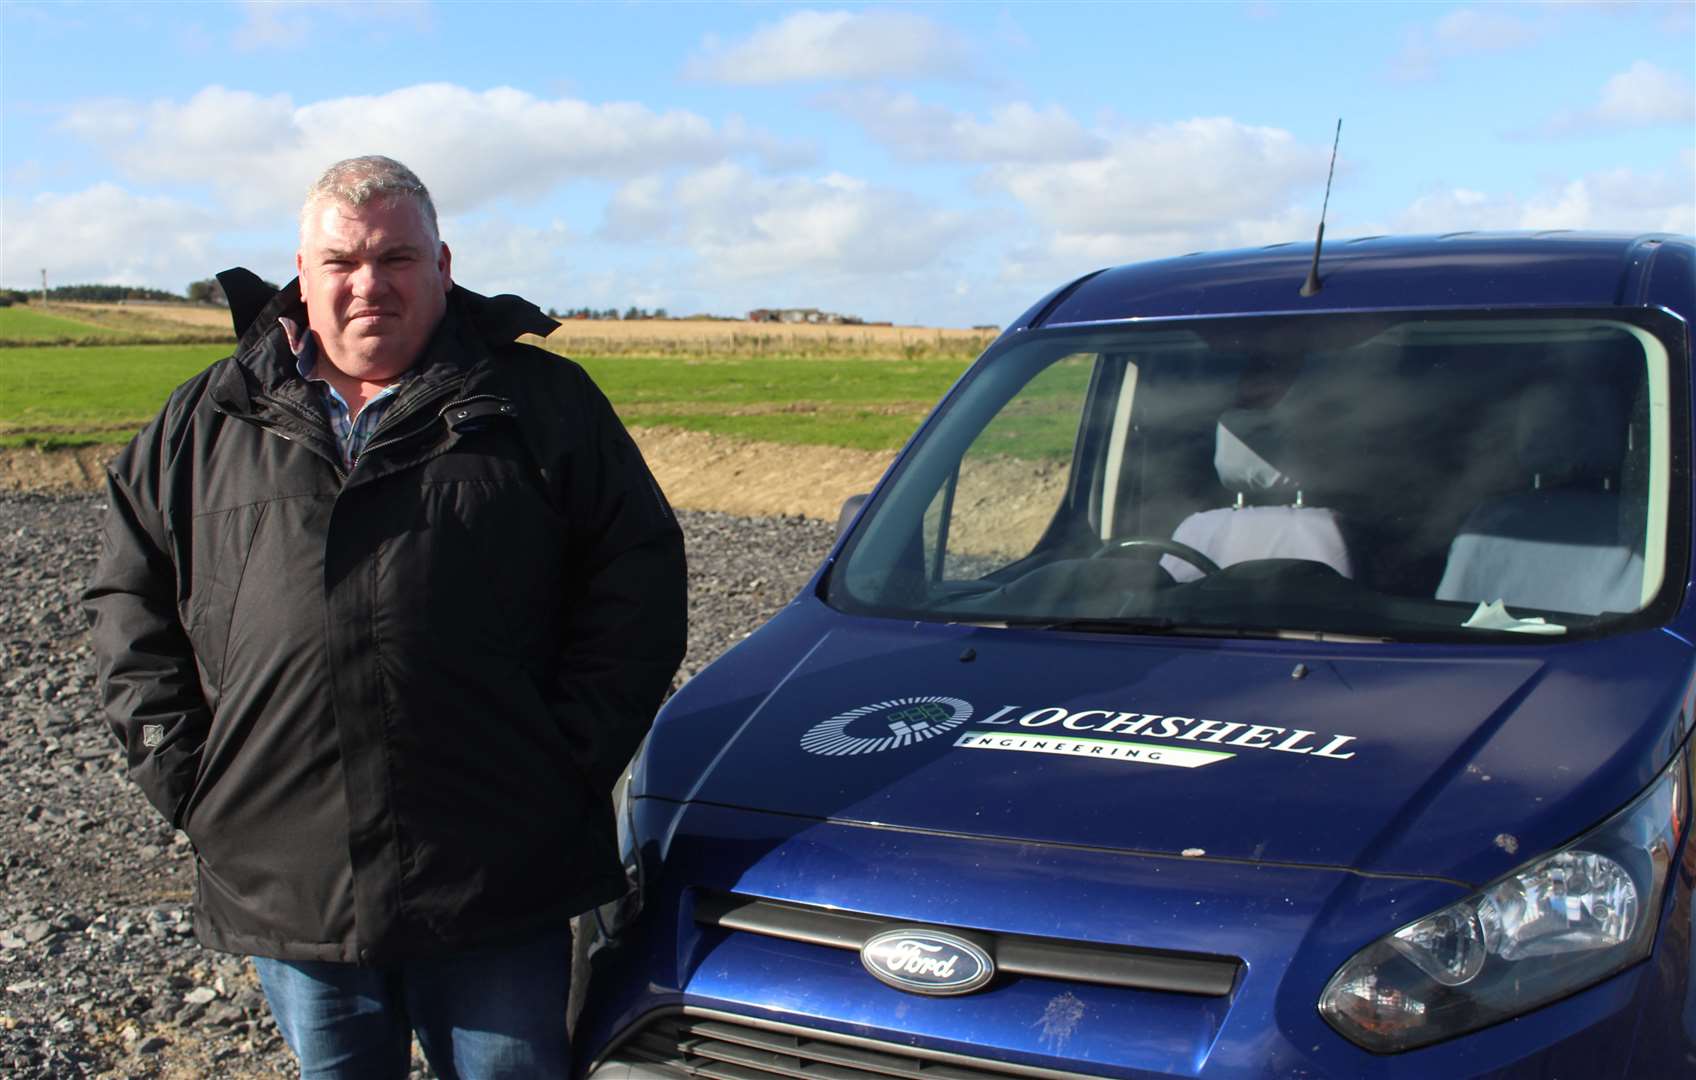 Donald Gow, managing director of Lochshell Engineering, at Charity Farm.